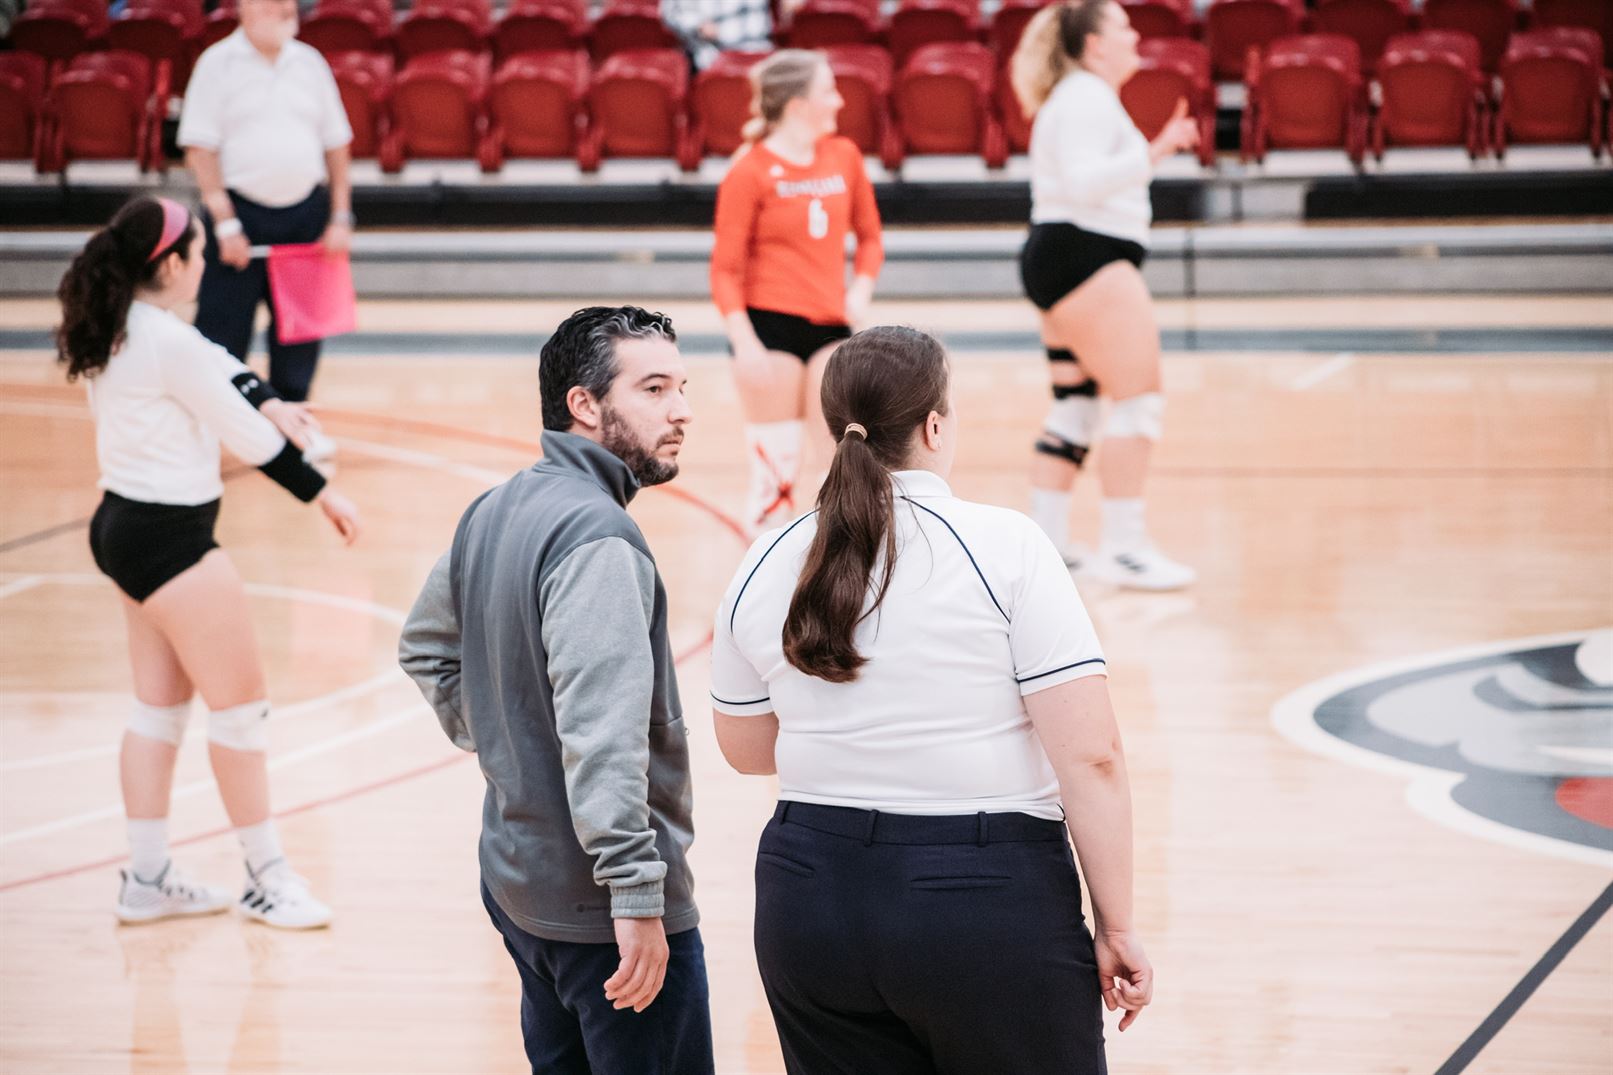 Some of the calls in this match left head coach Eddie Stawinski and the Pioneers' head coach angry and confused. Dan Dreisbach | The Montclarion